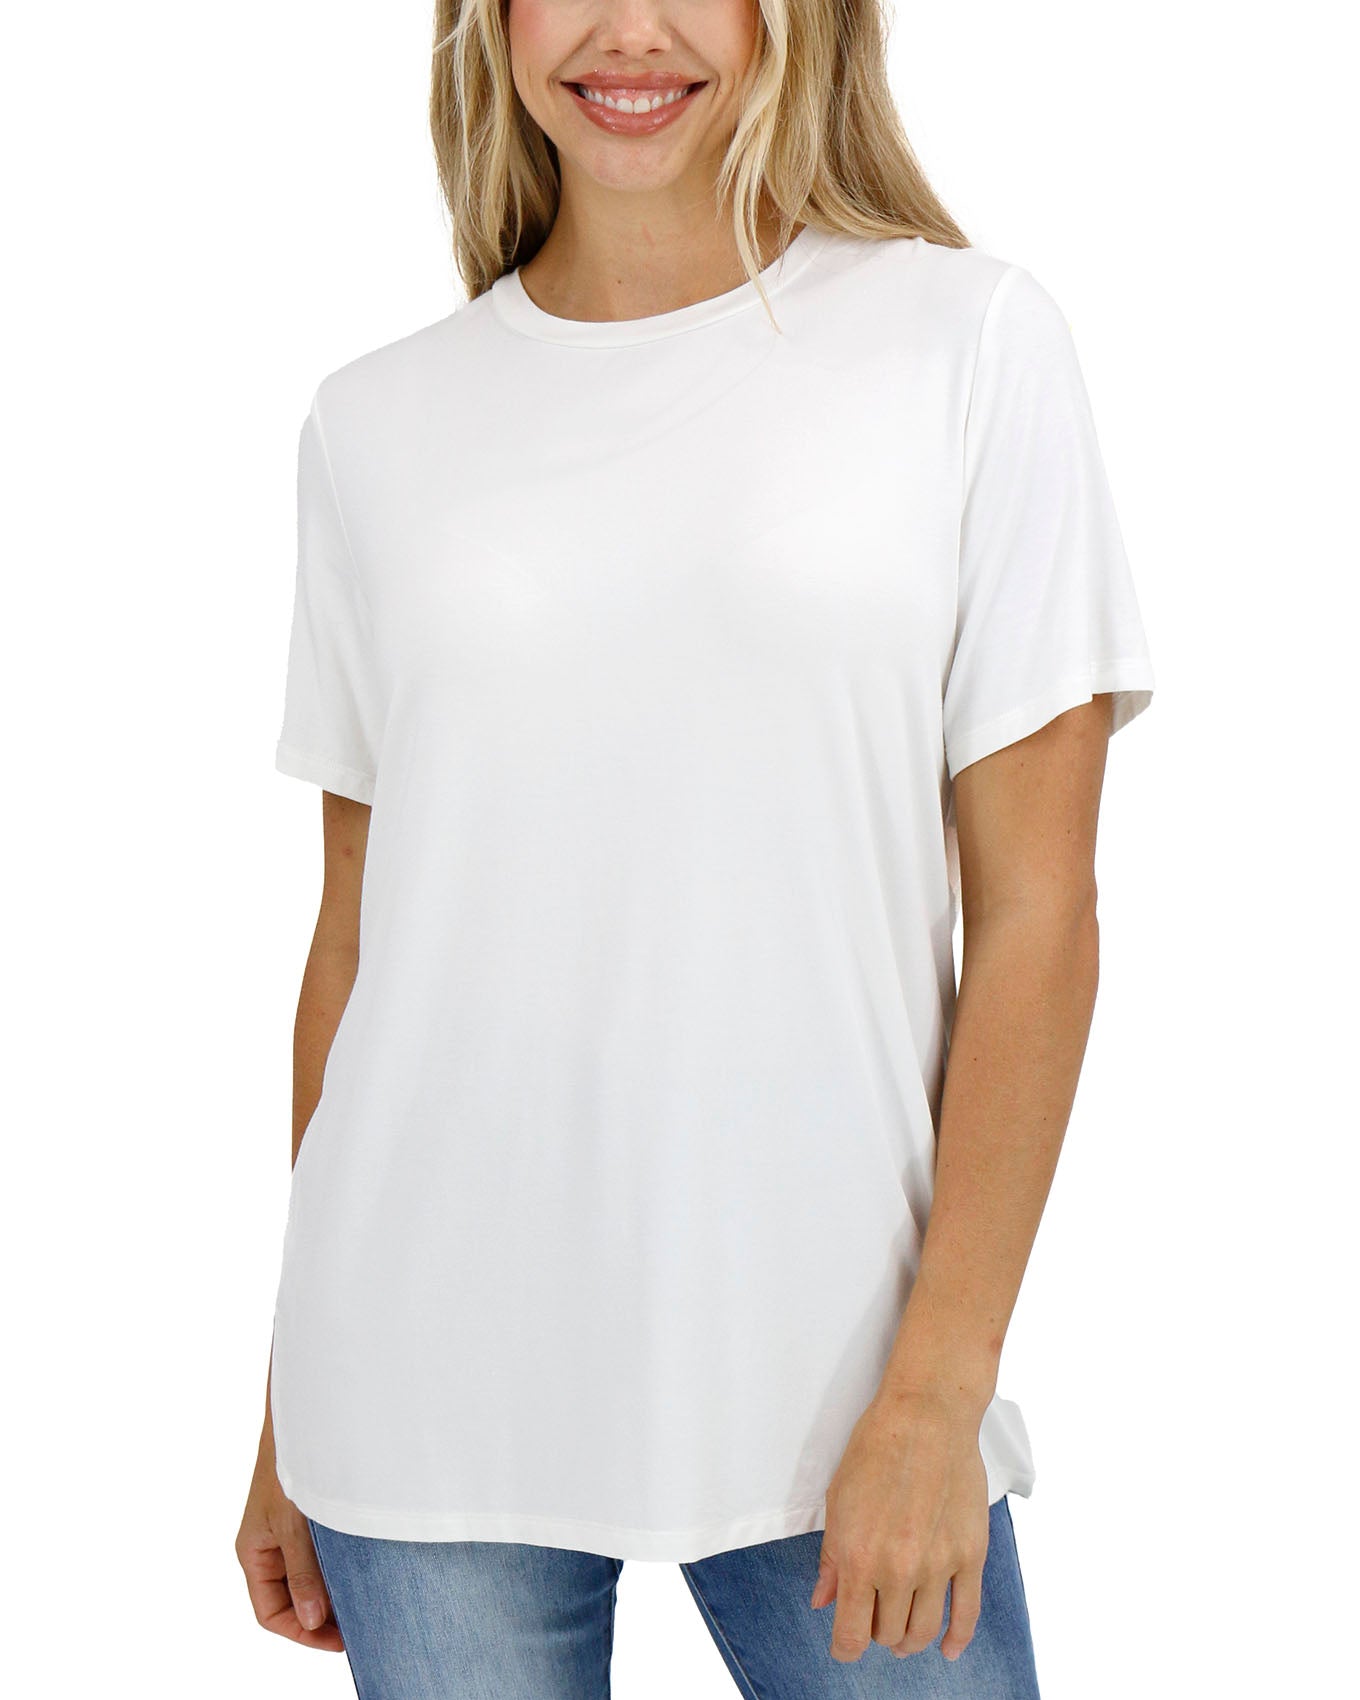 Ivory Girlfriend Fit Tee - Grace and Lace